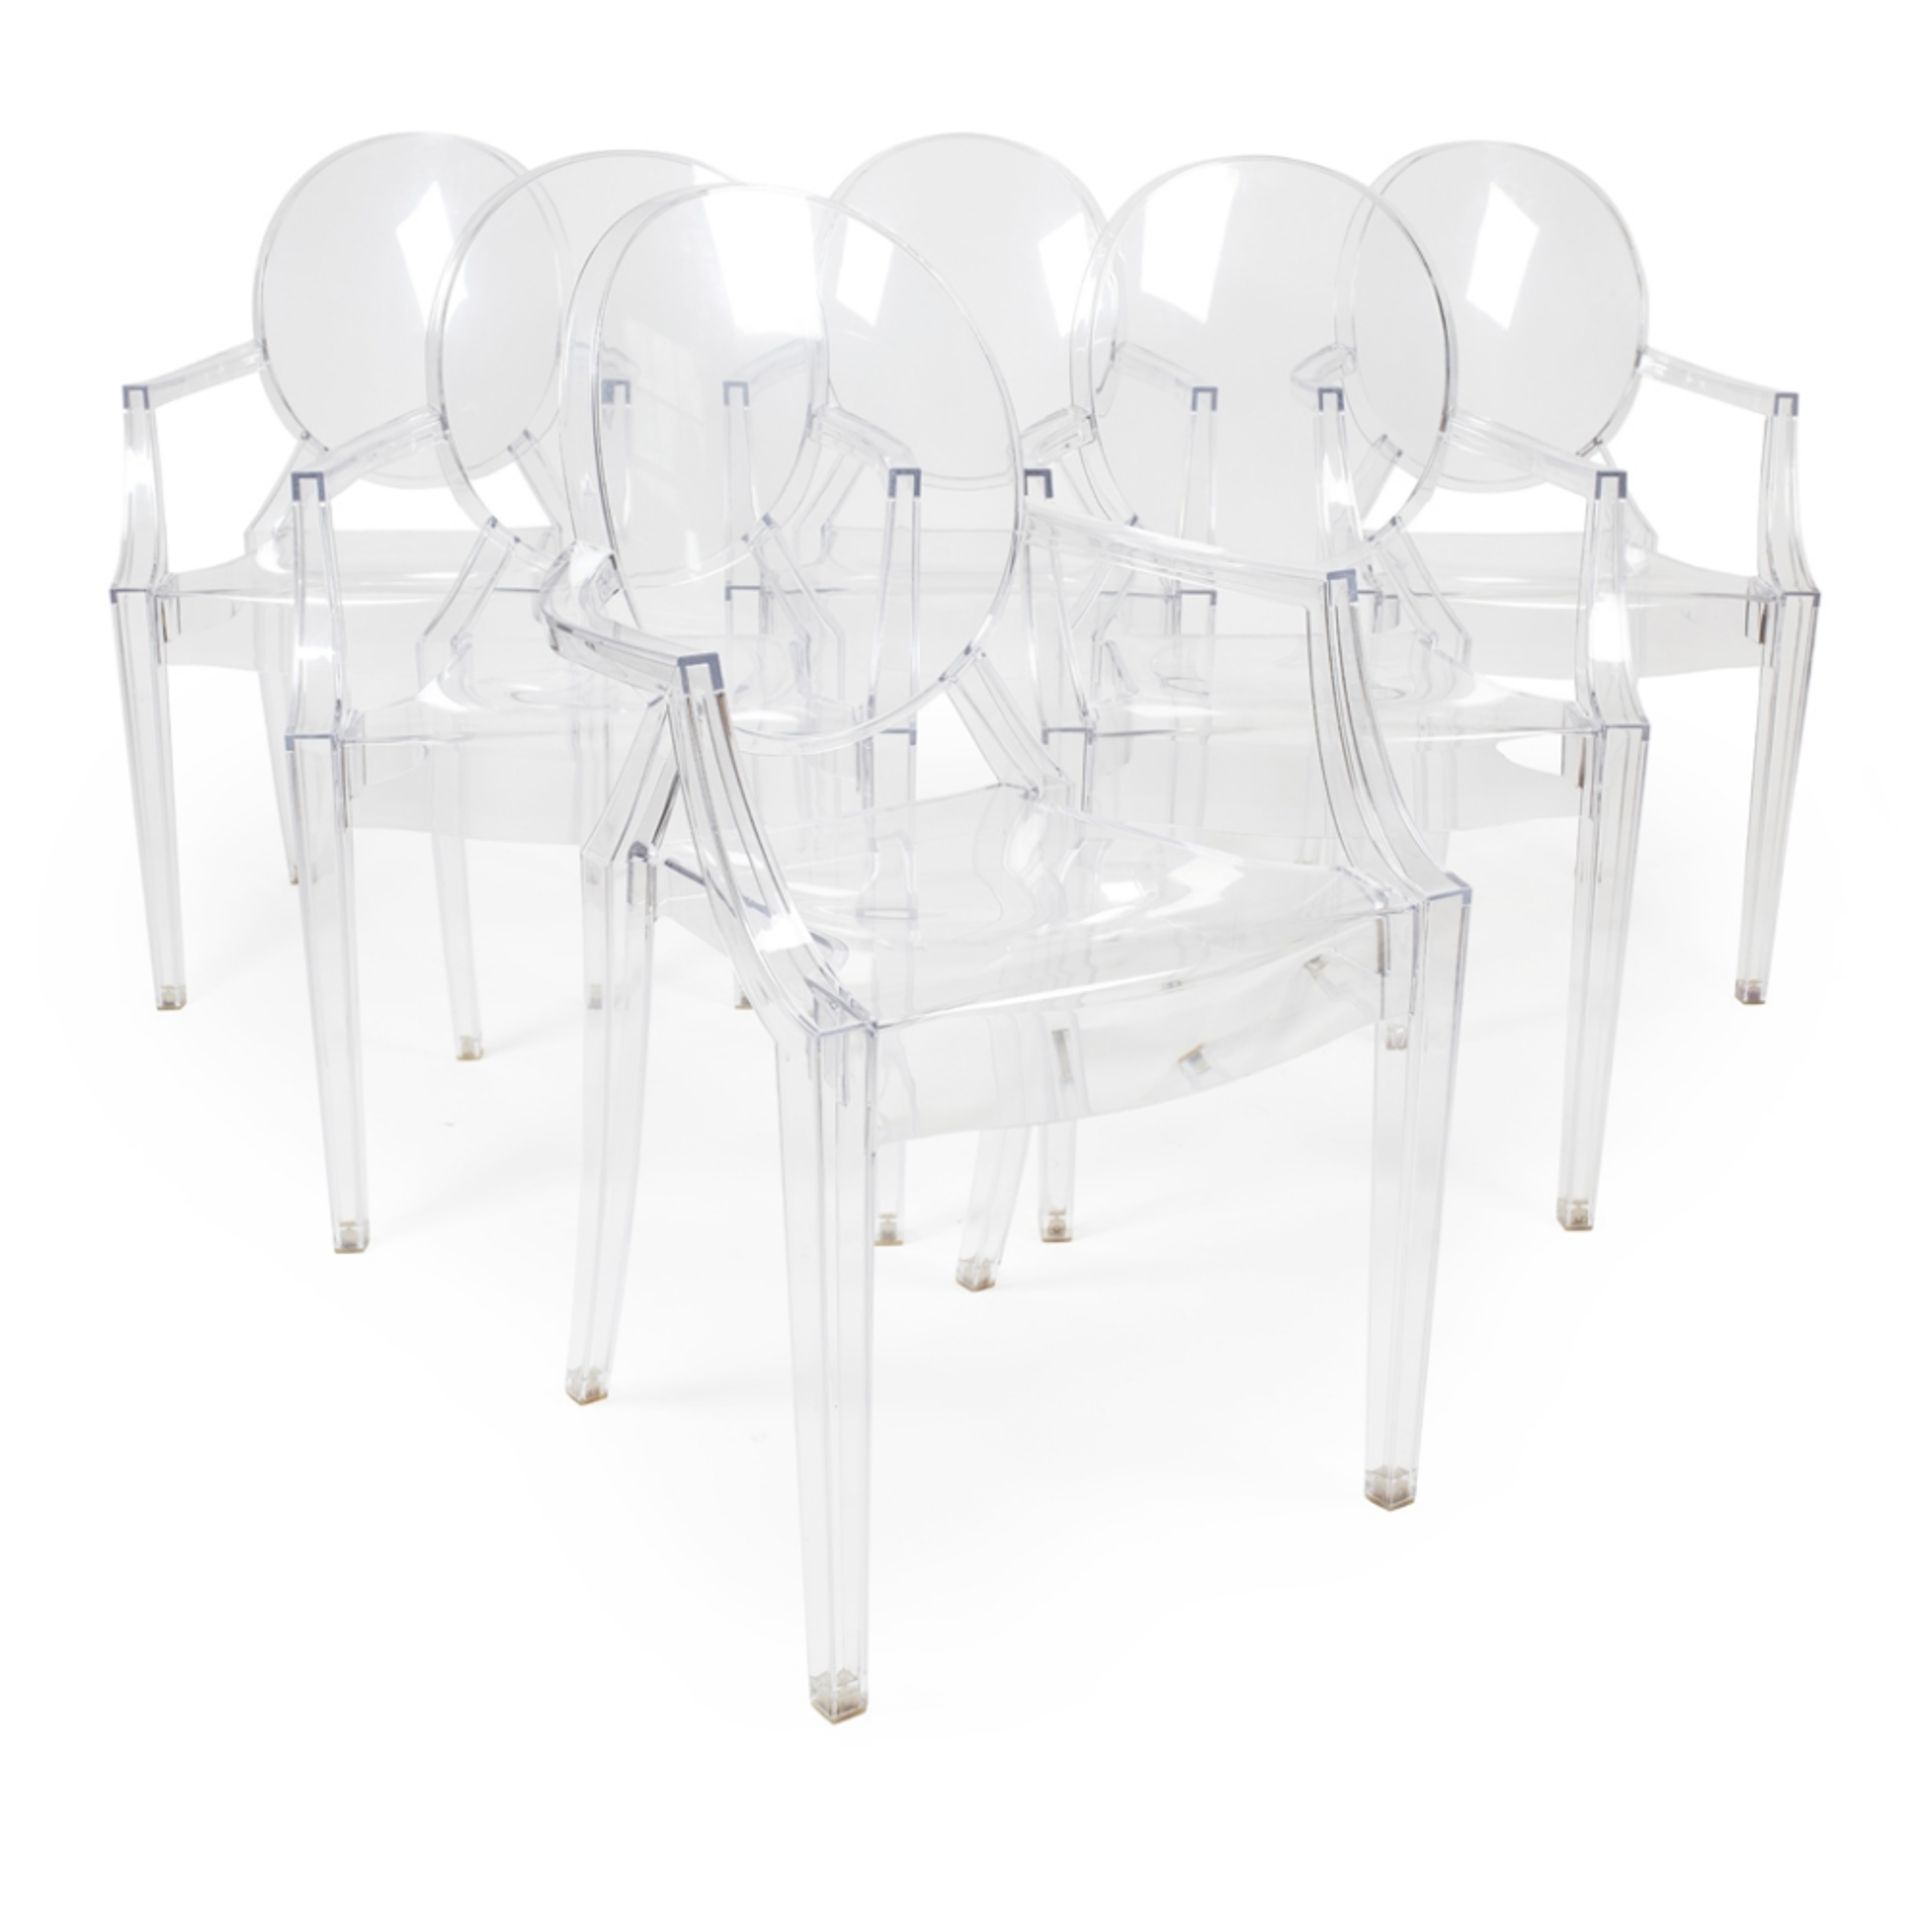 PHILIPPE STARCK (B. 1949) FOR KARTELL SET OF SIX ‘LOUIS GHOST’ ARMCHAIRS, DESIGNED 2003